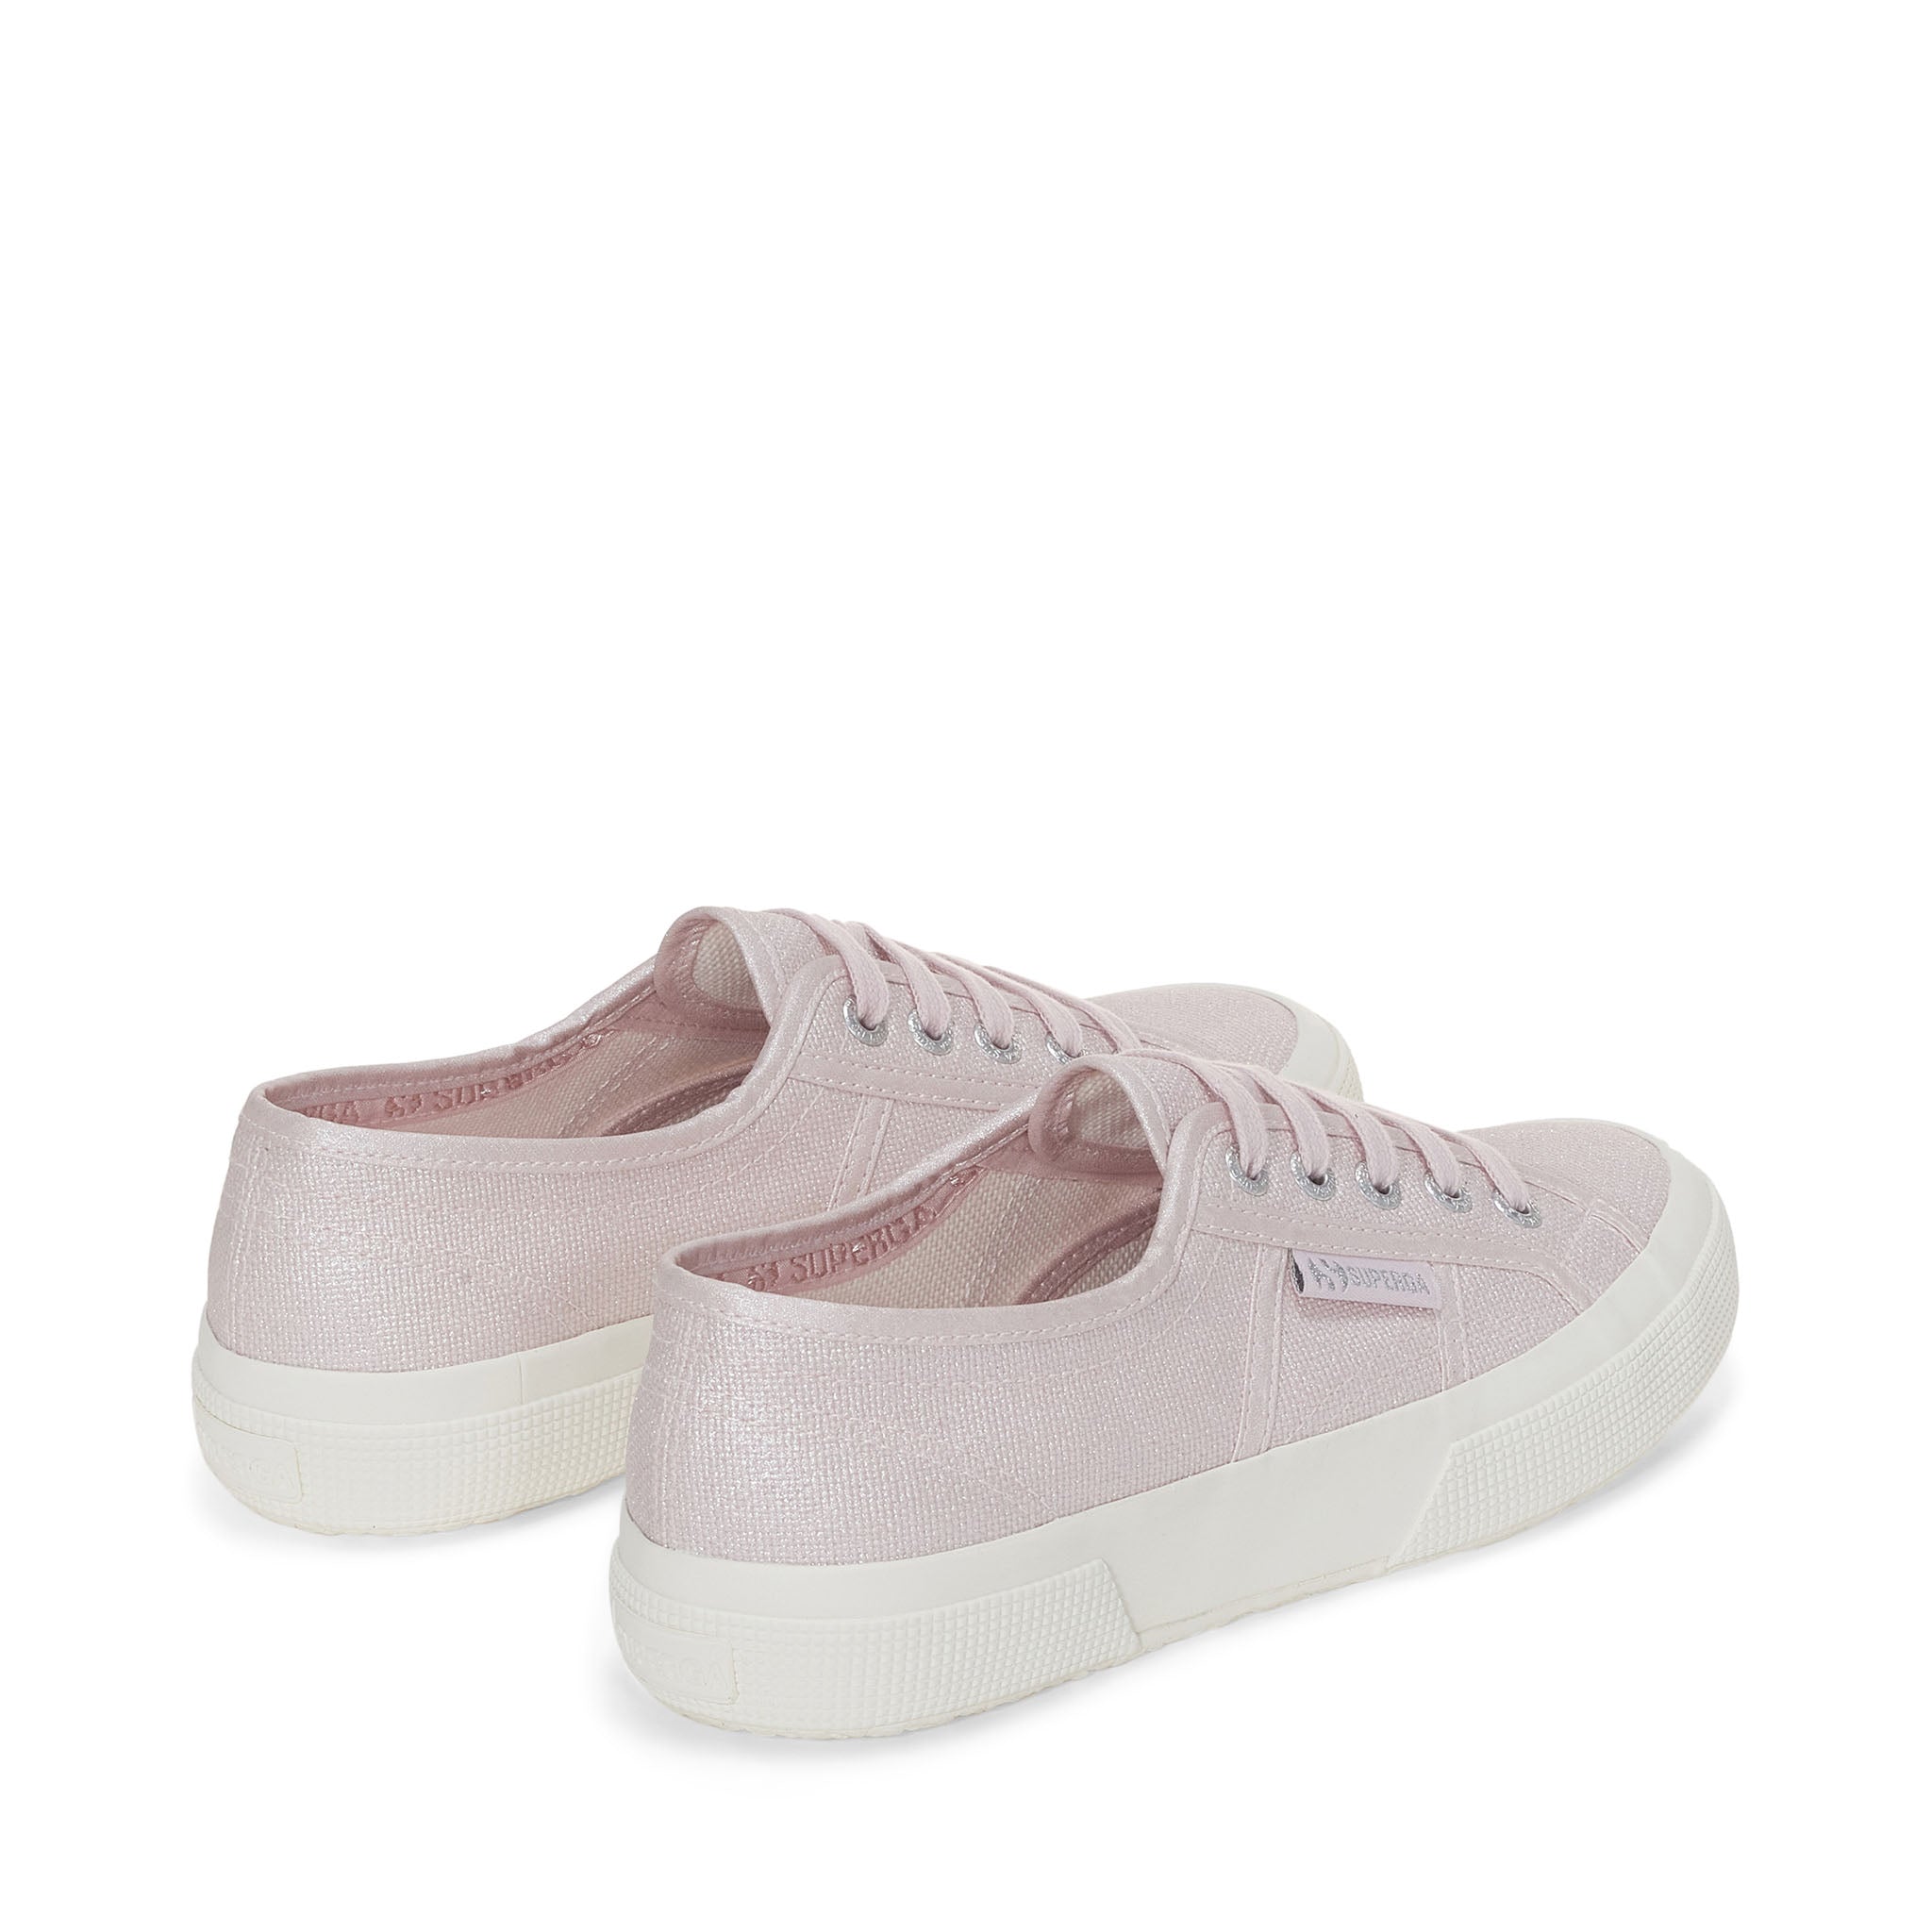 2750 Pearl Matte Canvas Sneakers - Violet Hushed Avorio